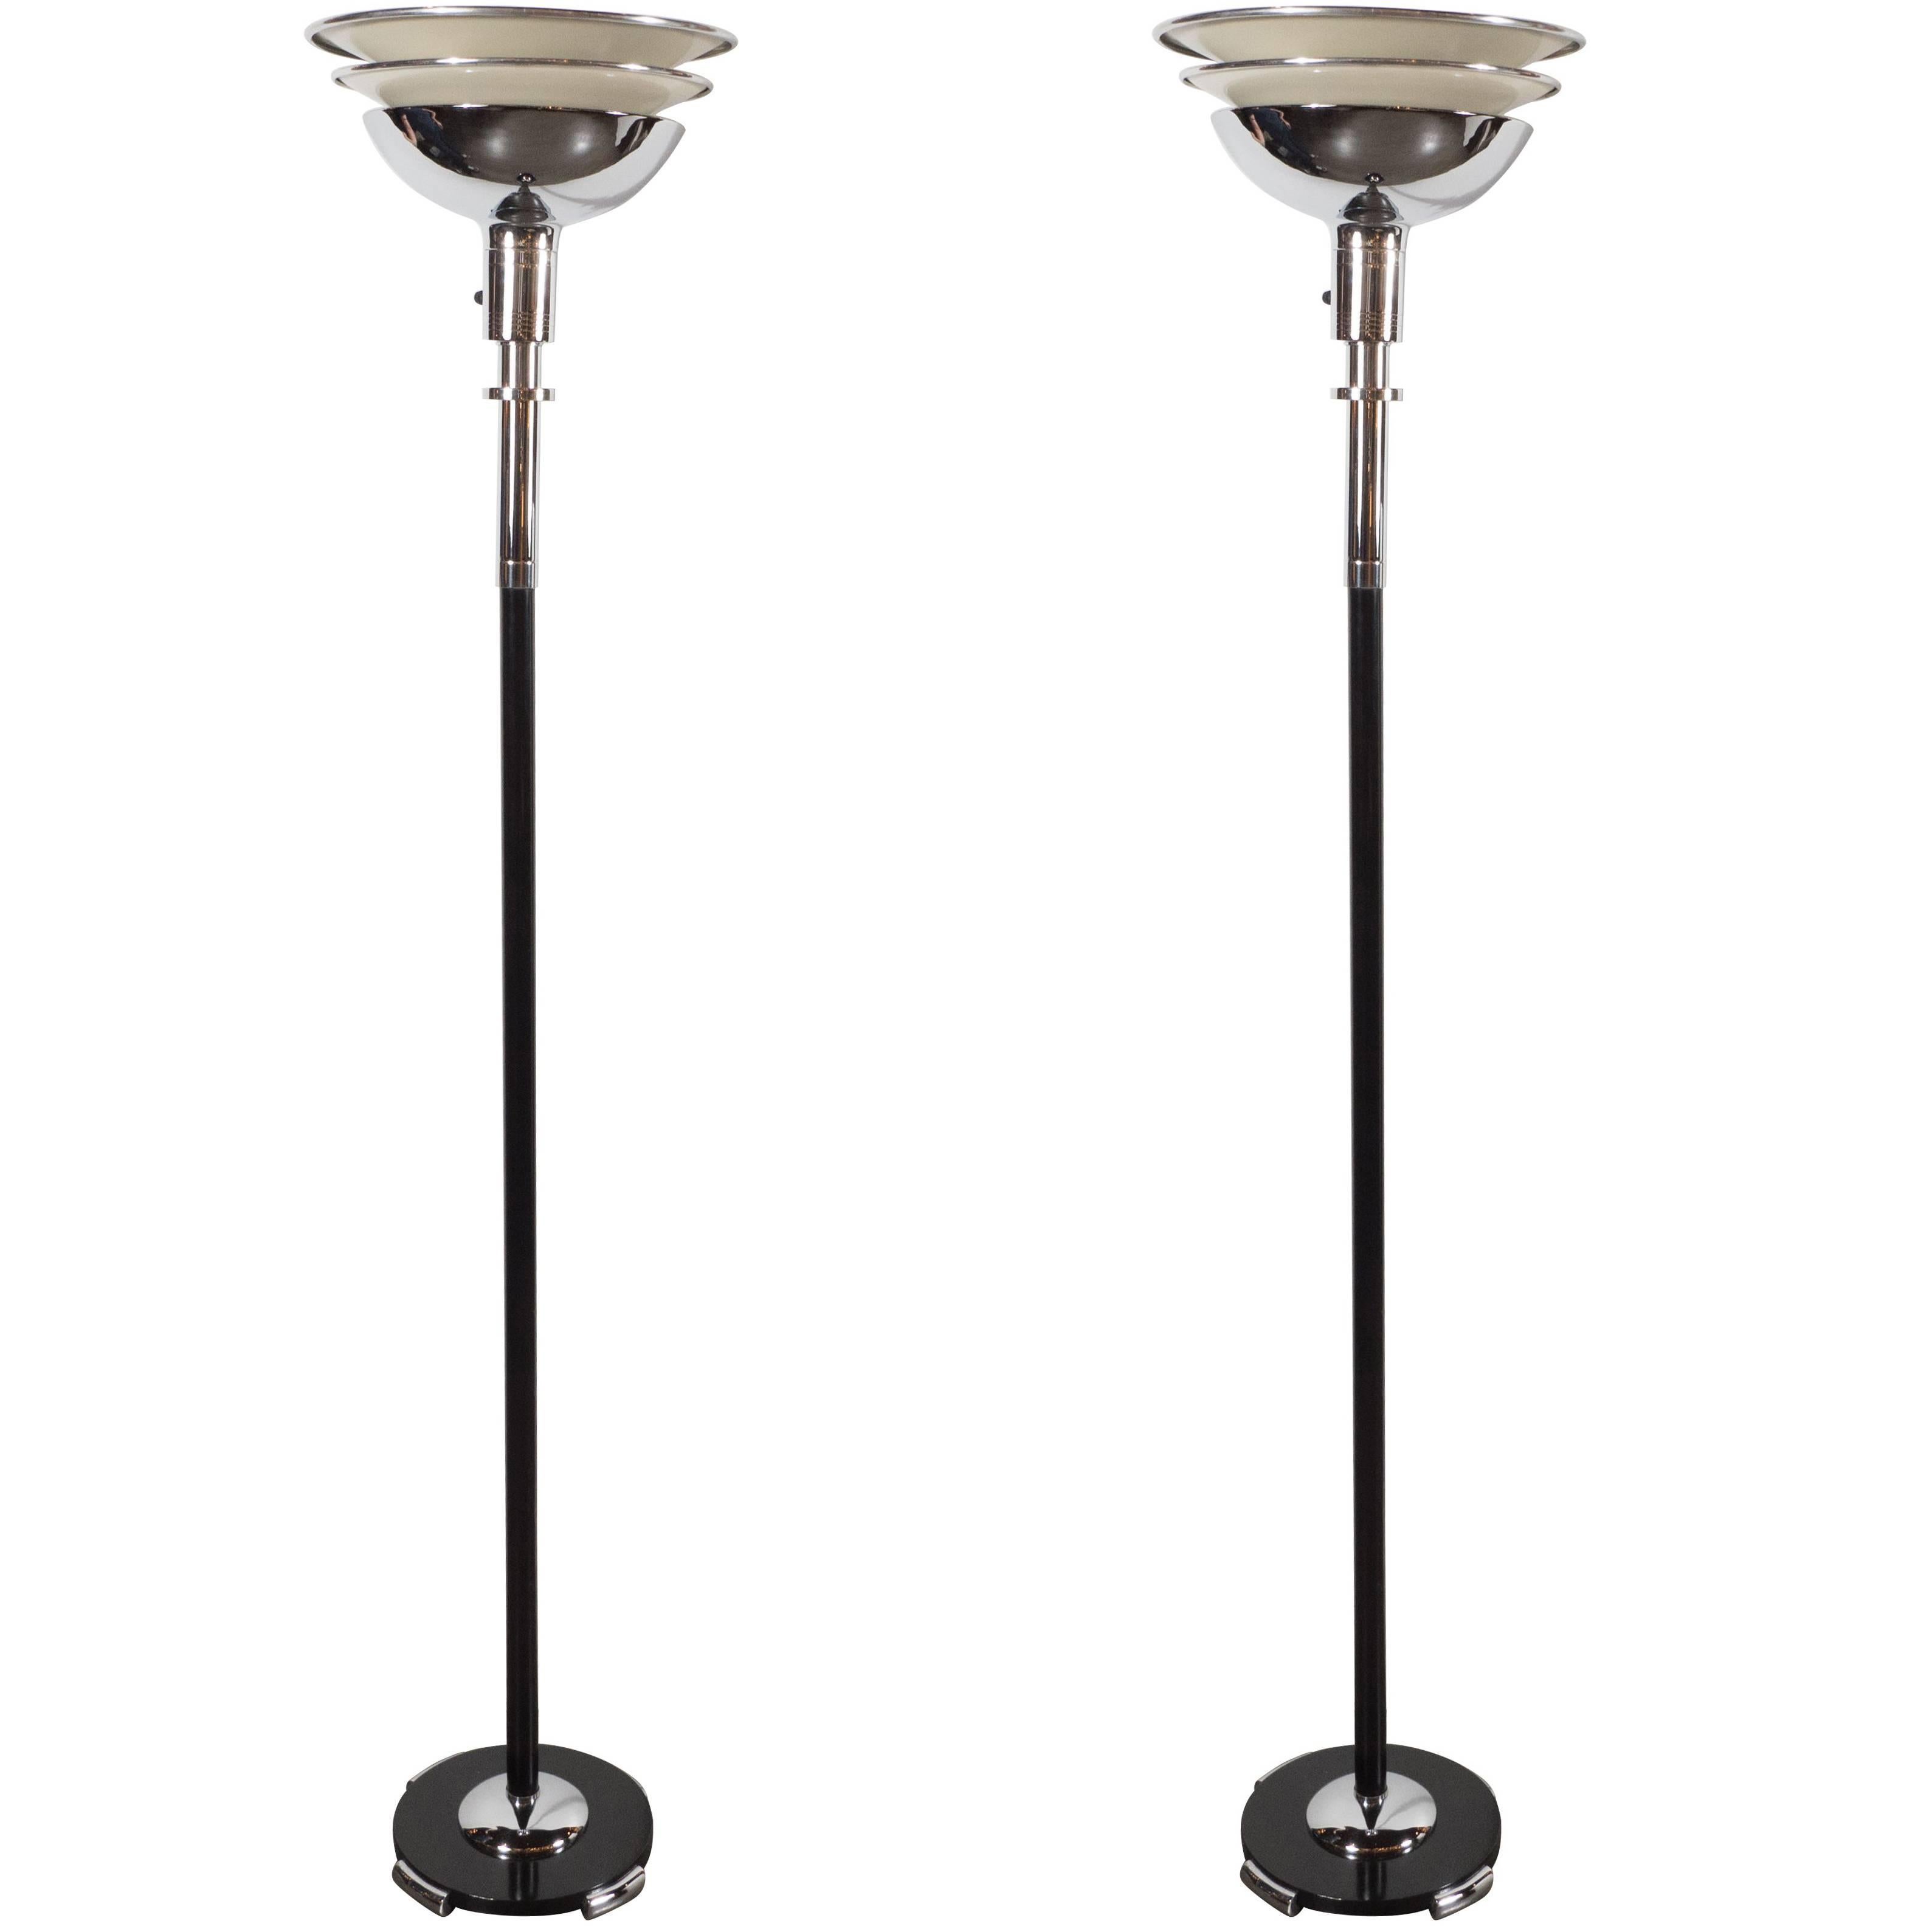 Pair of Machine Age Art Deco Floor Lamps by Gilbert Rohde for Mutual Sunset Co.